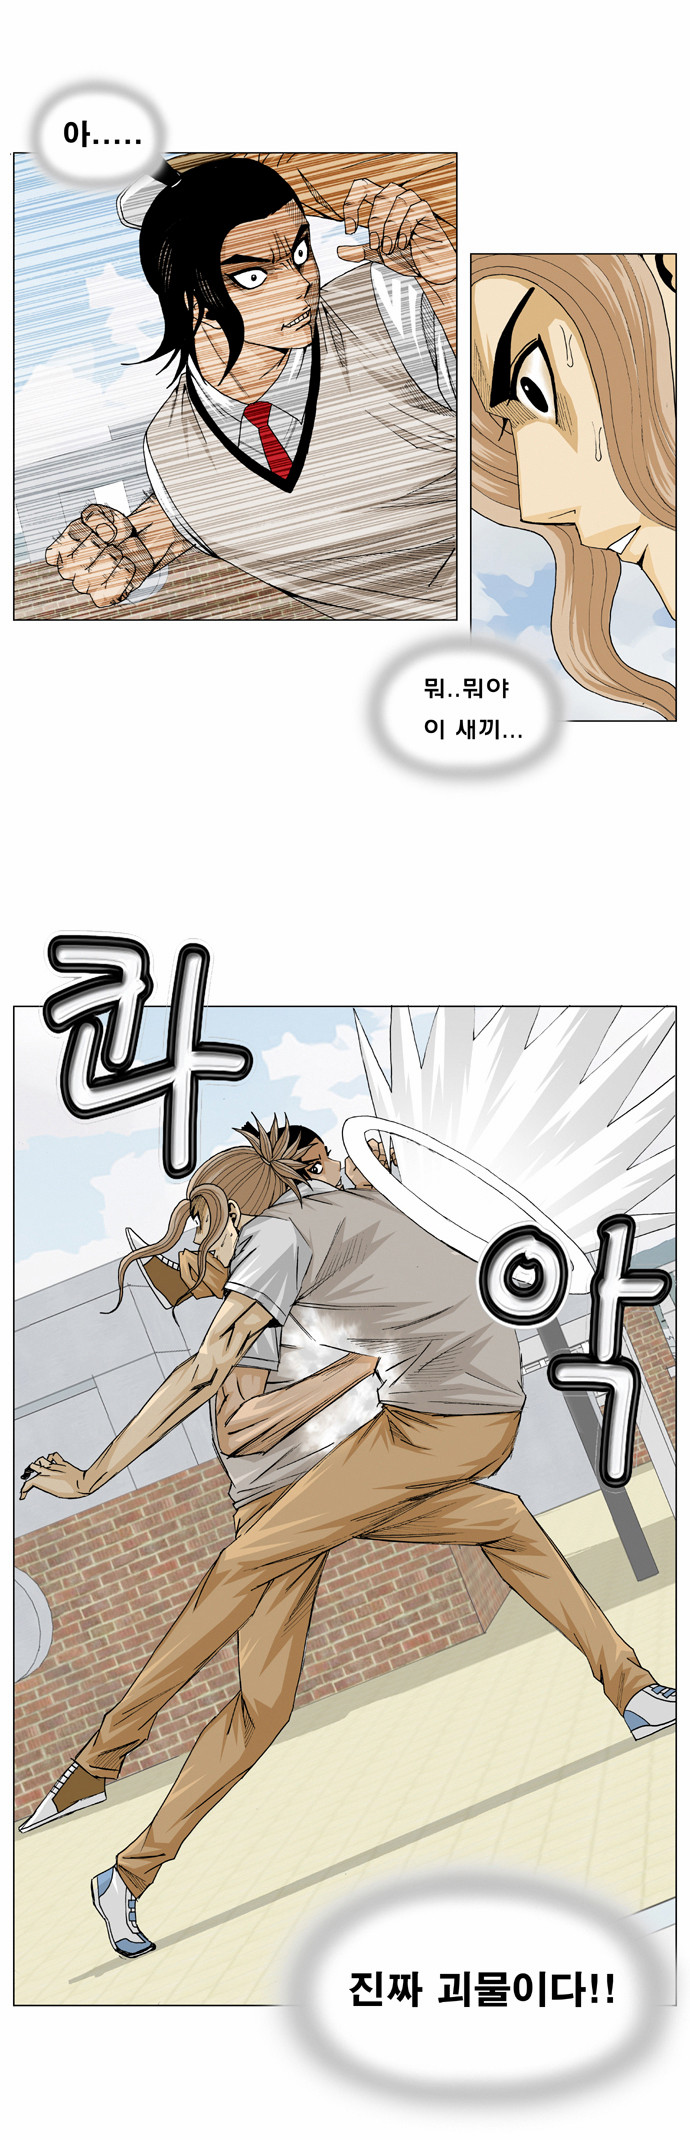 Ultimate Legend - Kang Hae Hyo - Chapter 10 - Page 27